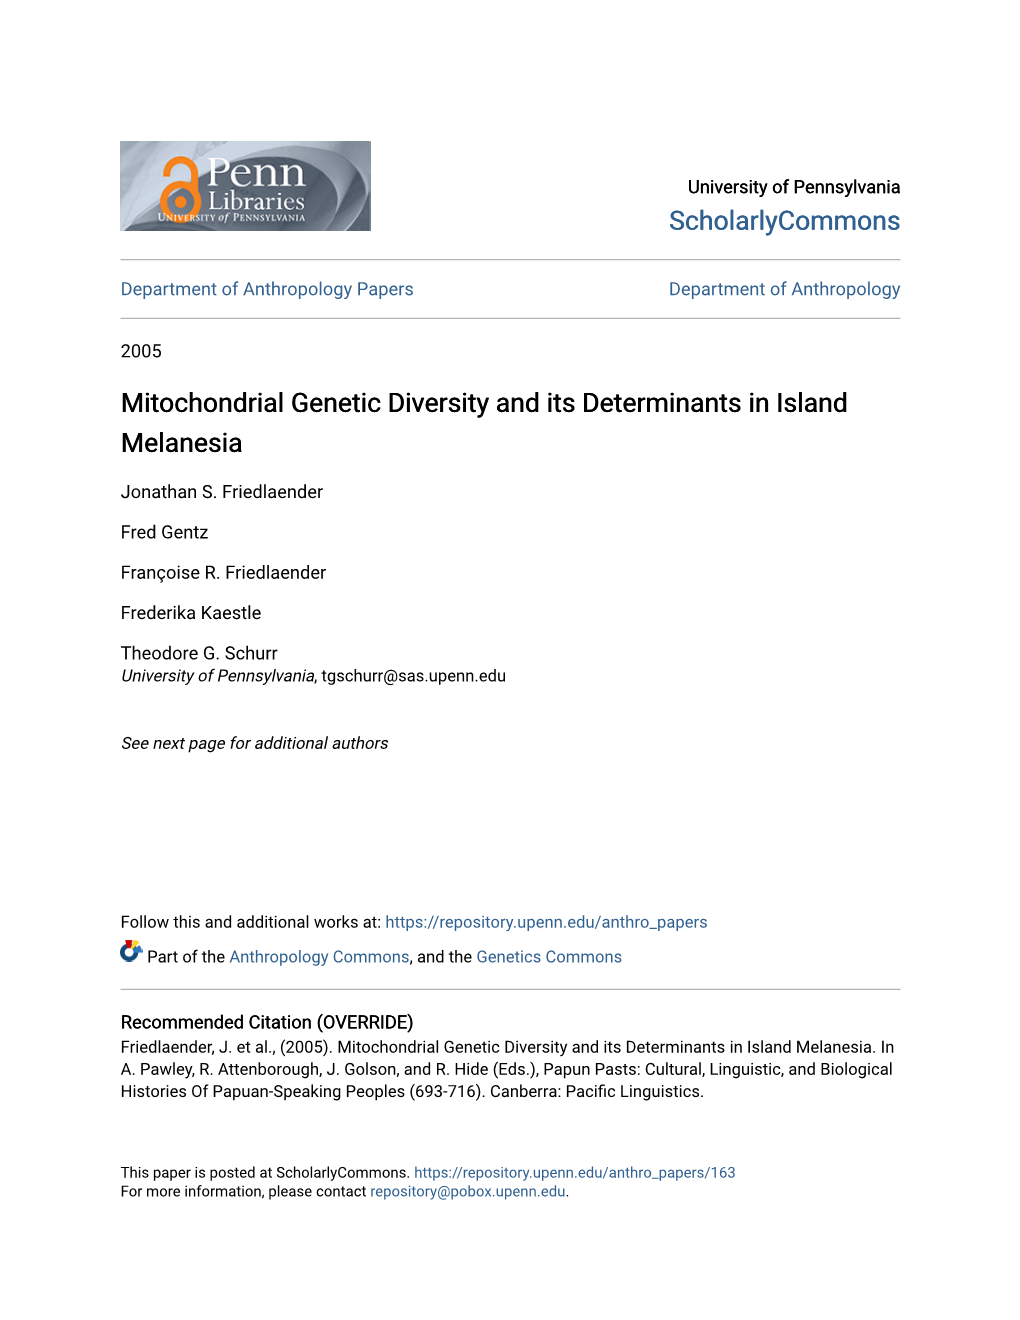 Mitochondrial Genetic Diversity and Its Determinants in Island Melanesia